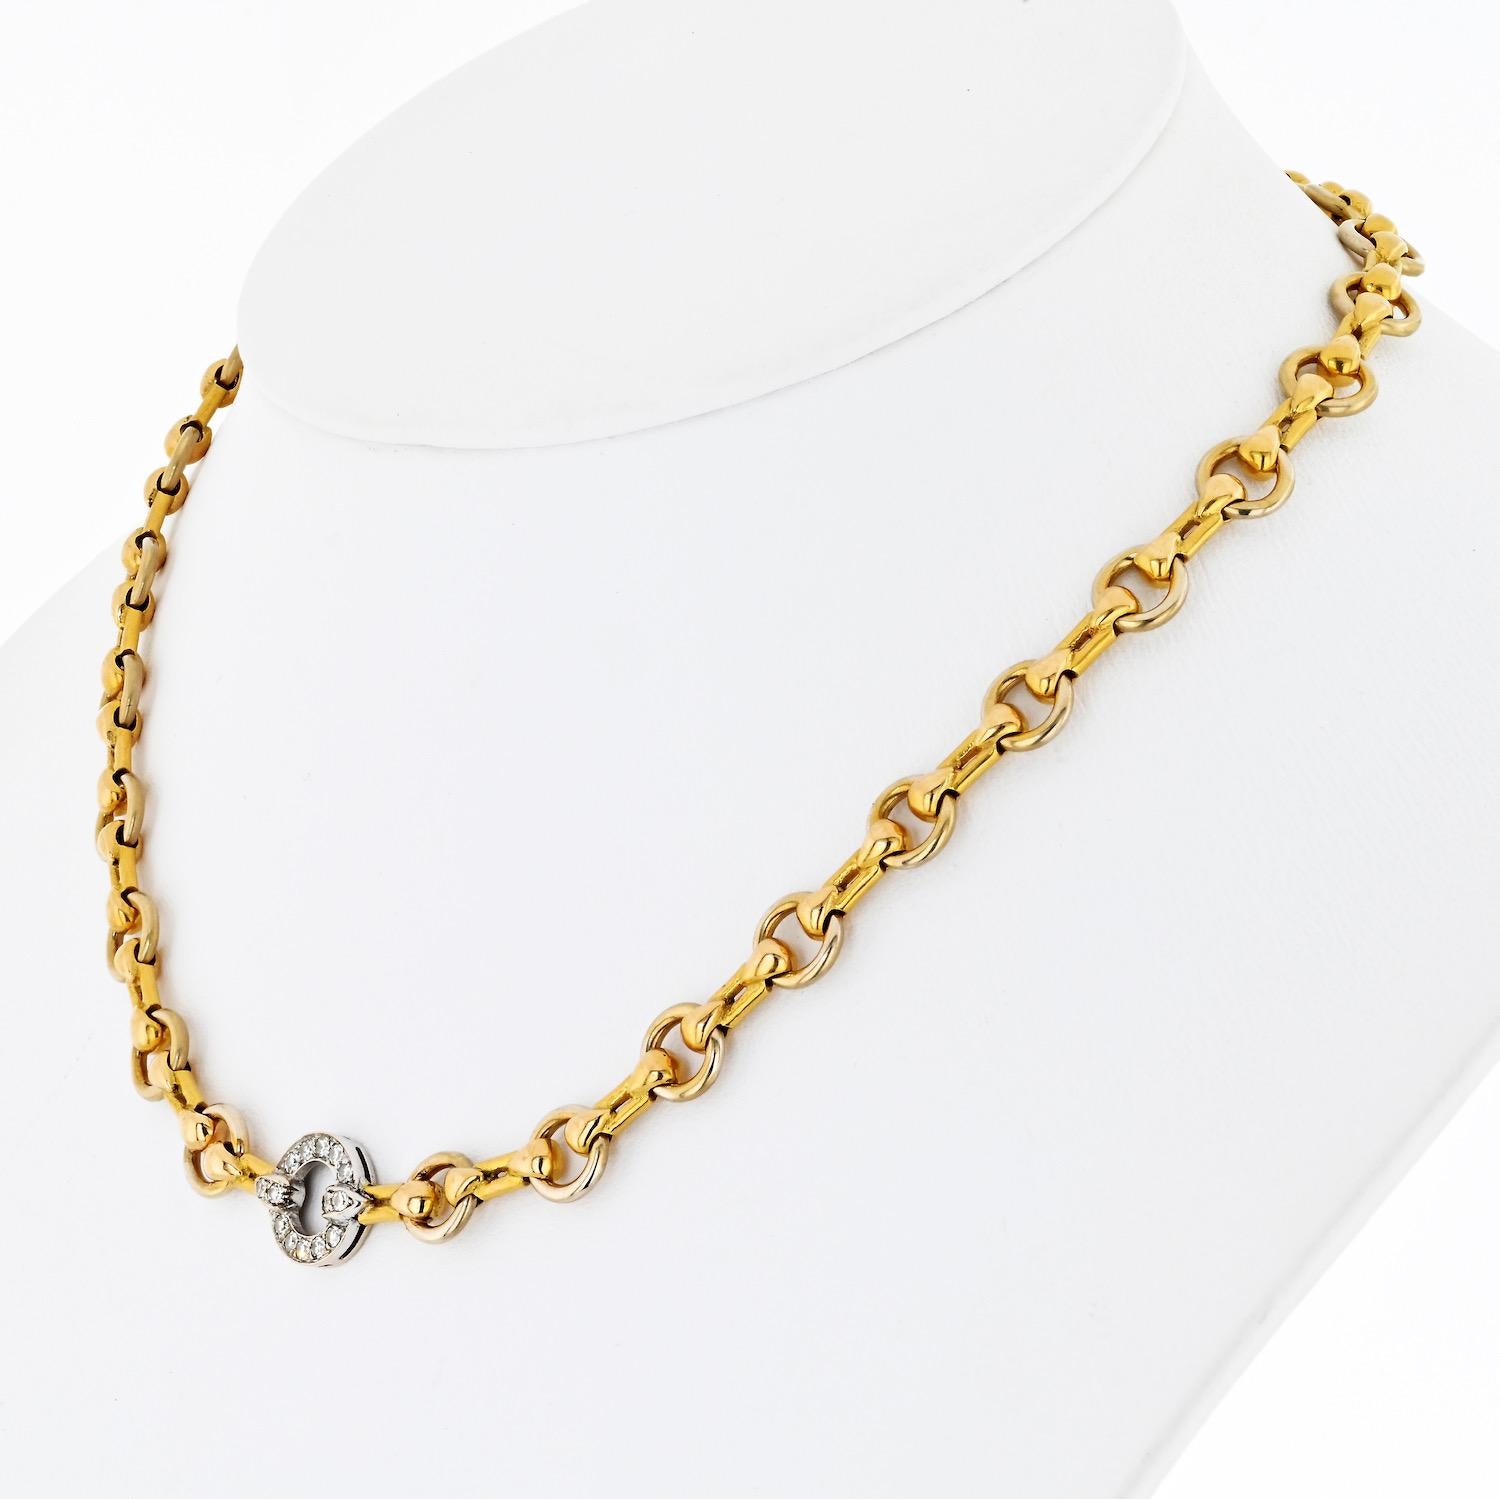 18k yellow gold chain necklace 16 inch